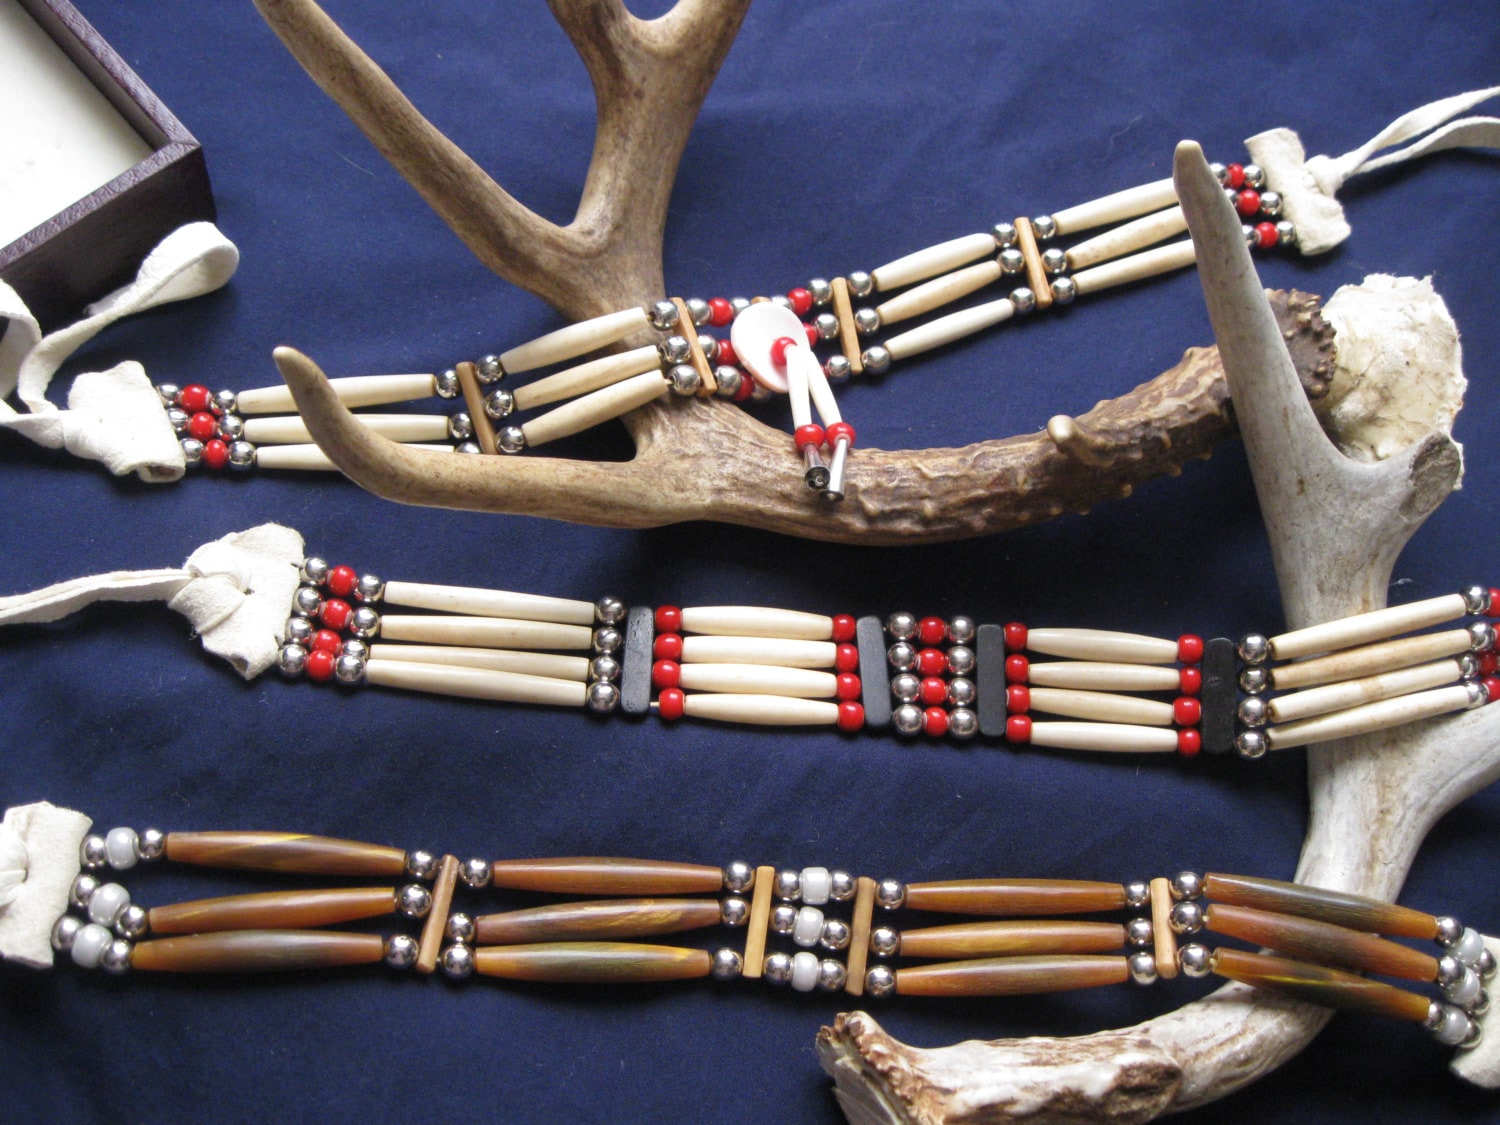 BD02425, carved bone beads, India, made in India, hand carved bone beads,  4mm bone beads, bovine